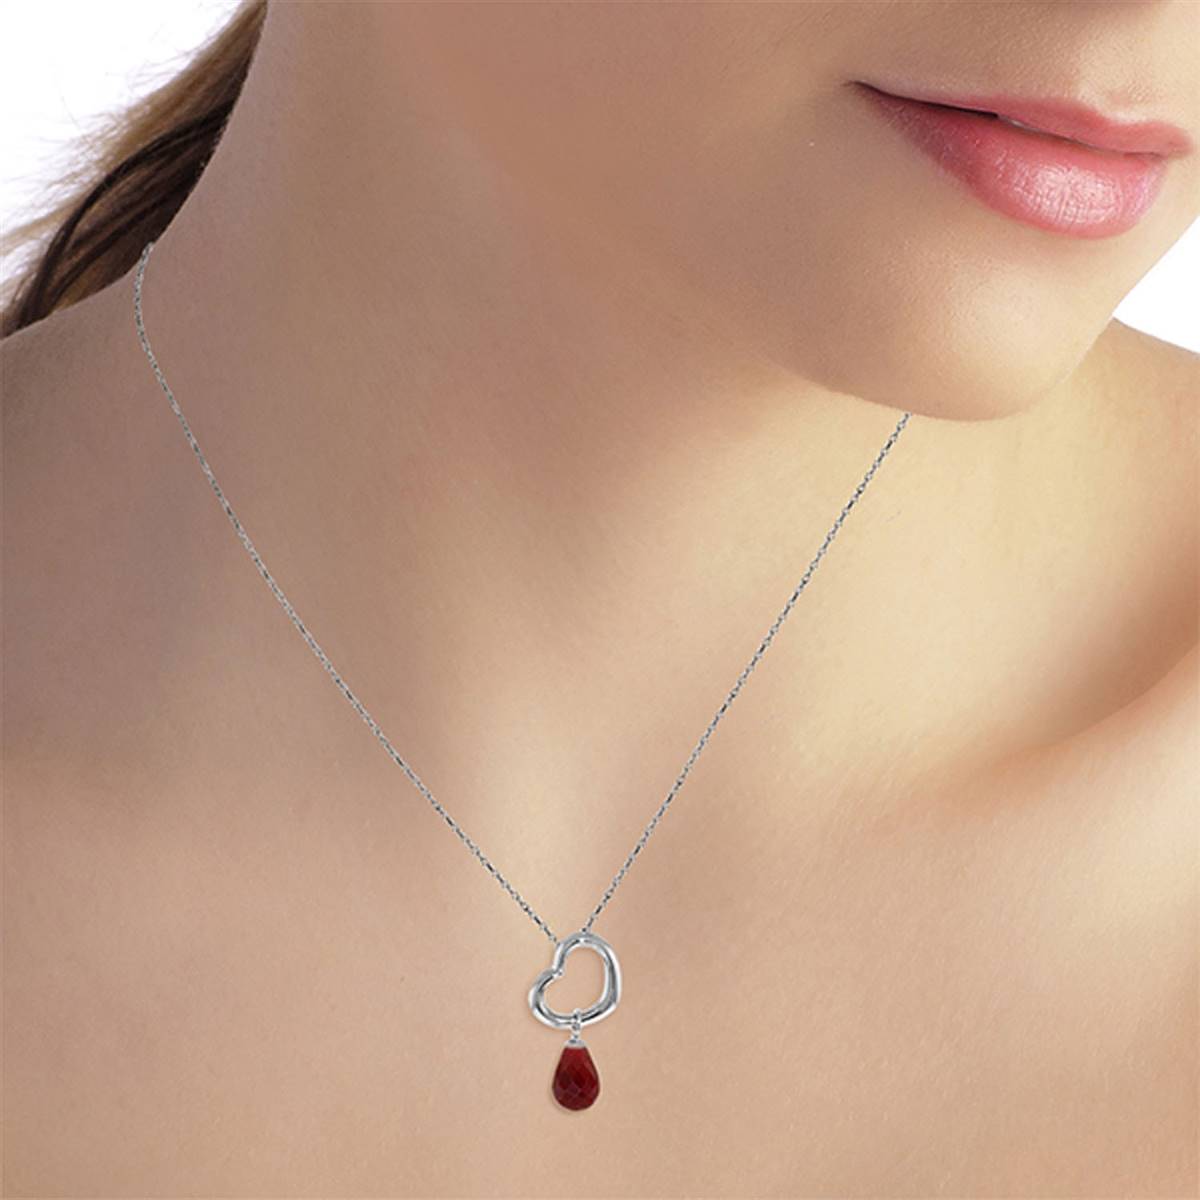 14K Solid White Gold Heart Necklace w/ Dangling Natural Ruby